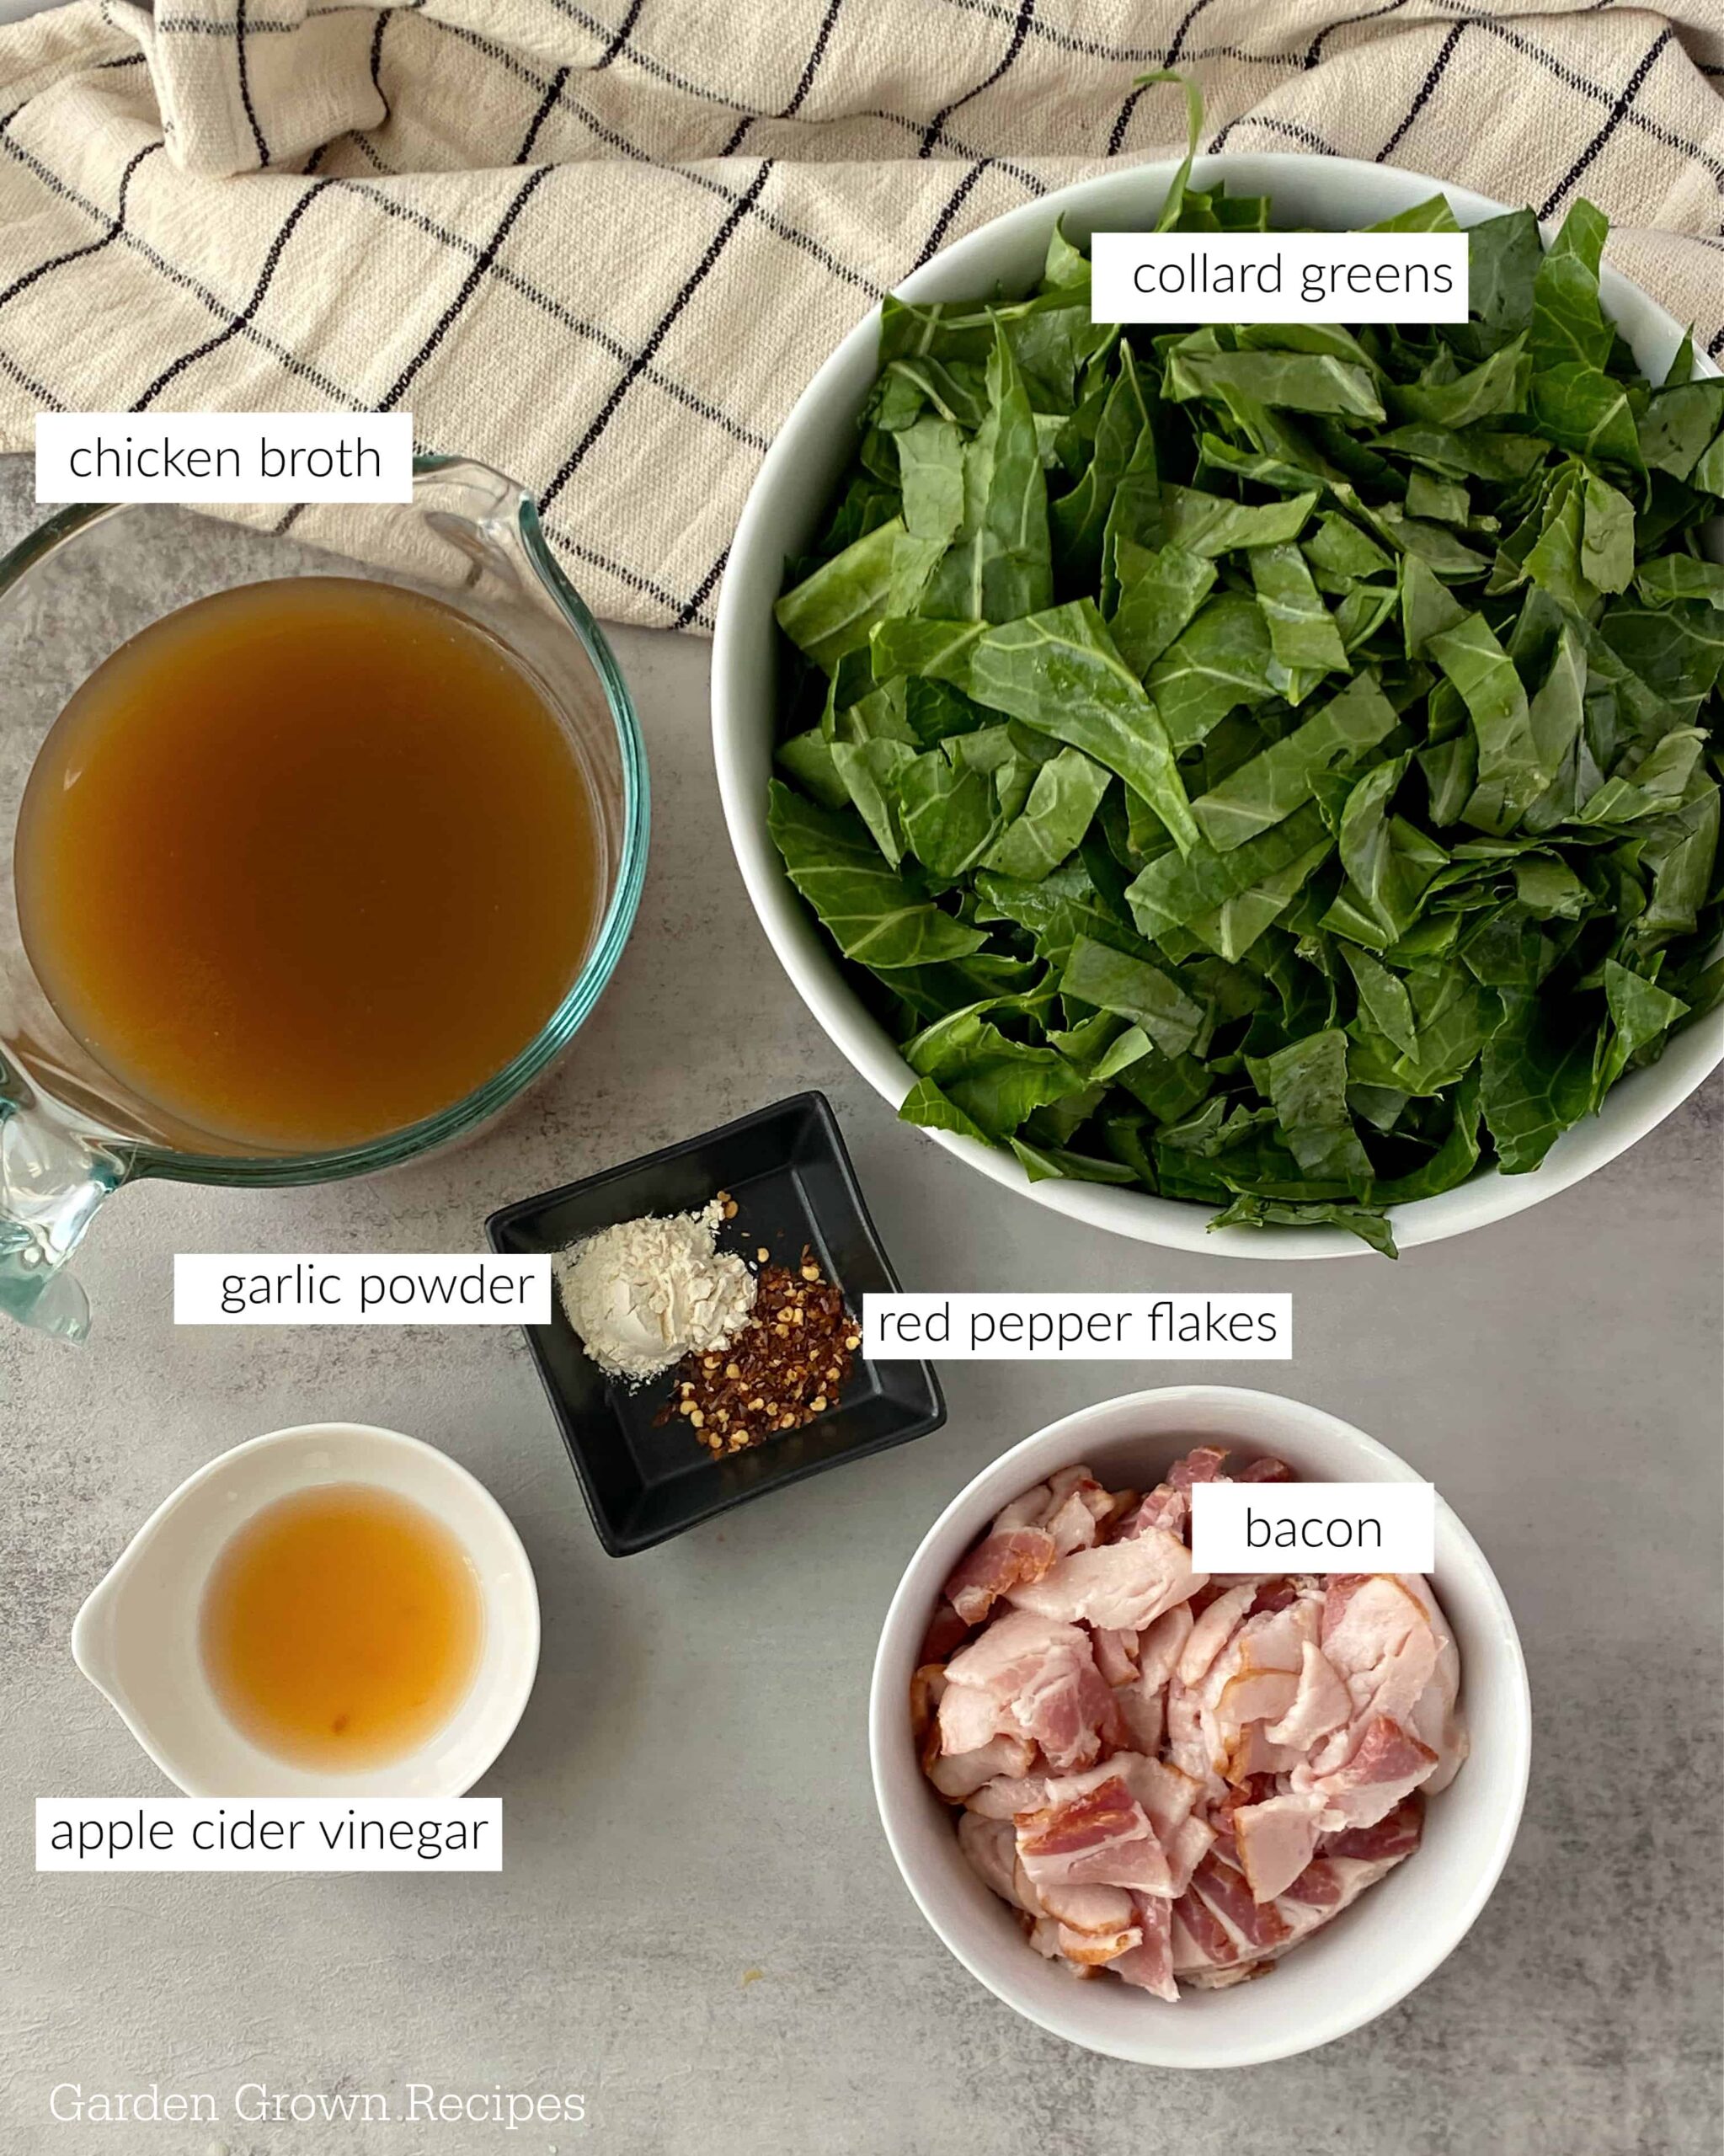 ingredients to make easy collard greens recipe with chicken broth and bacon and garlic